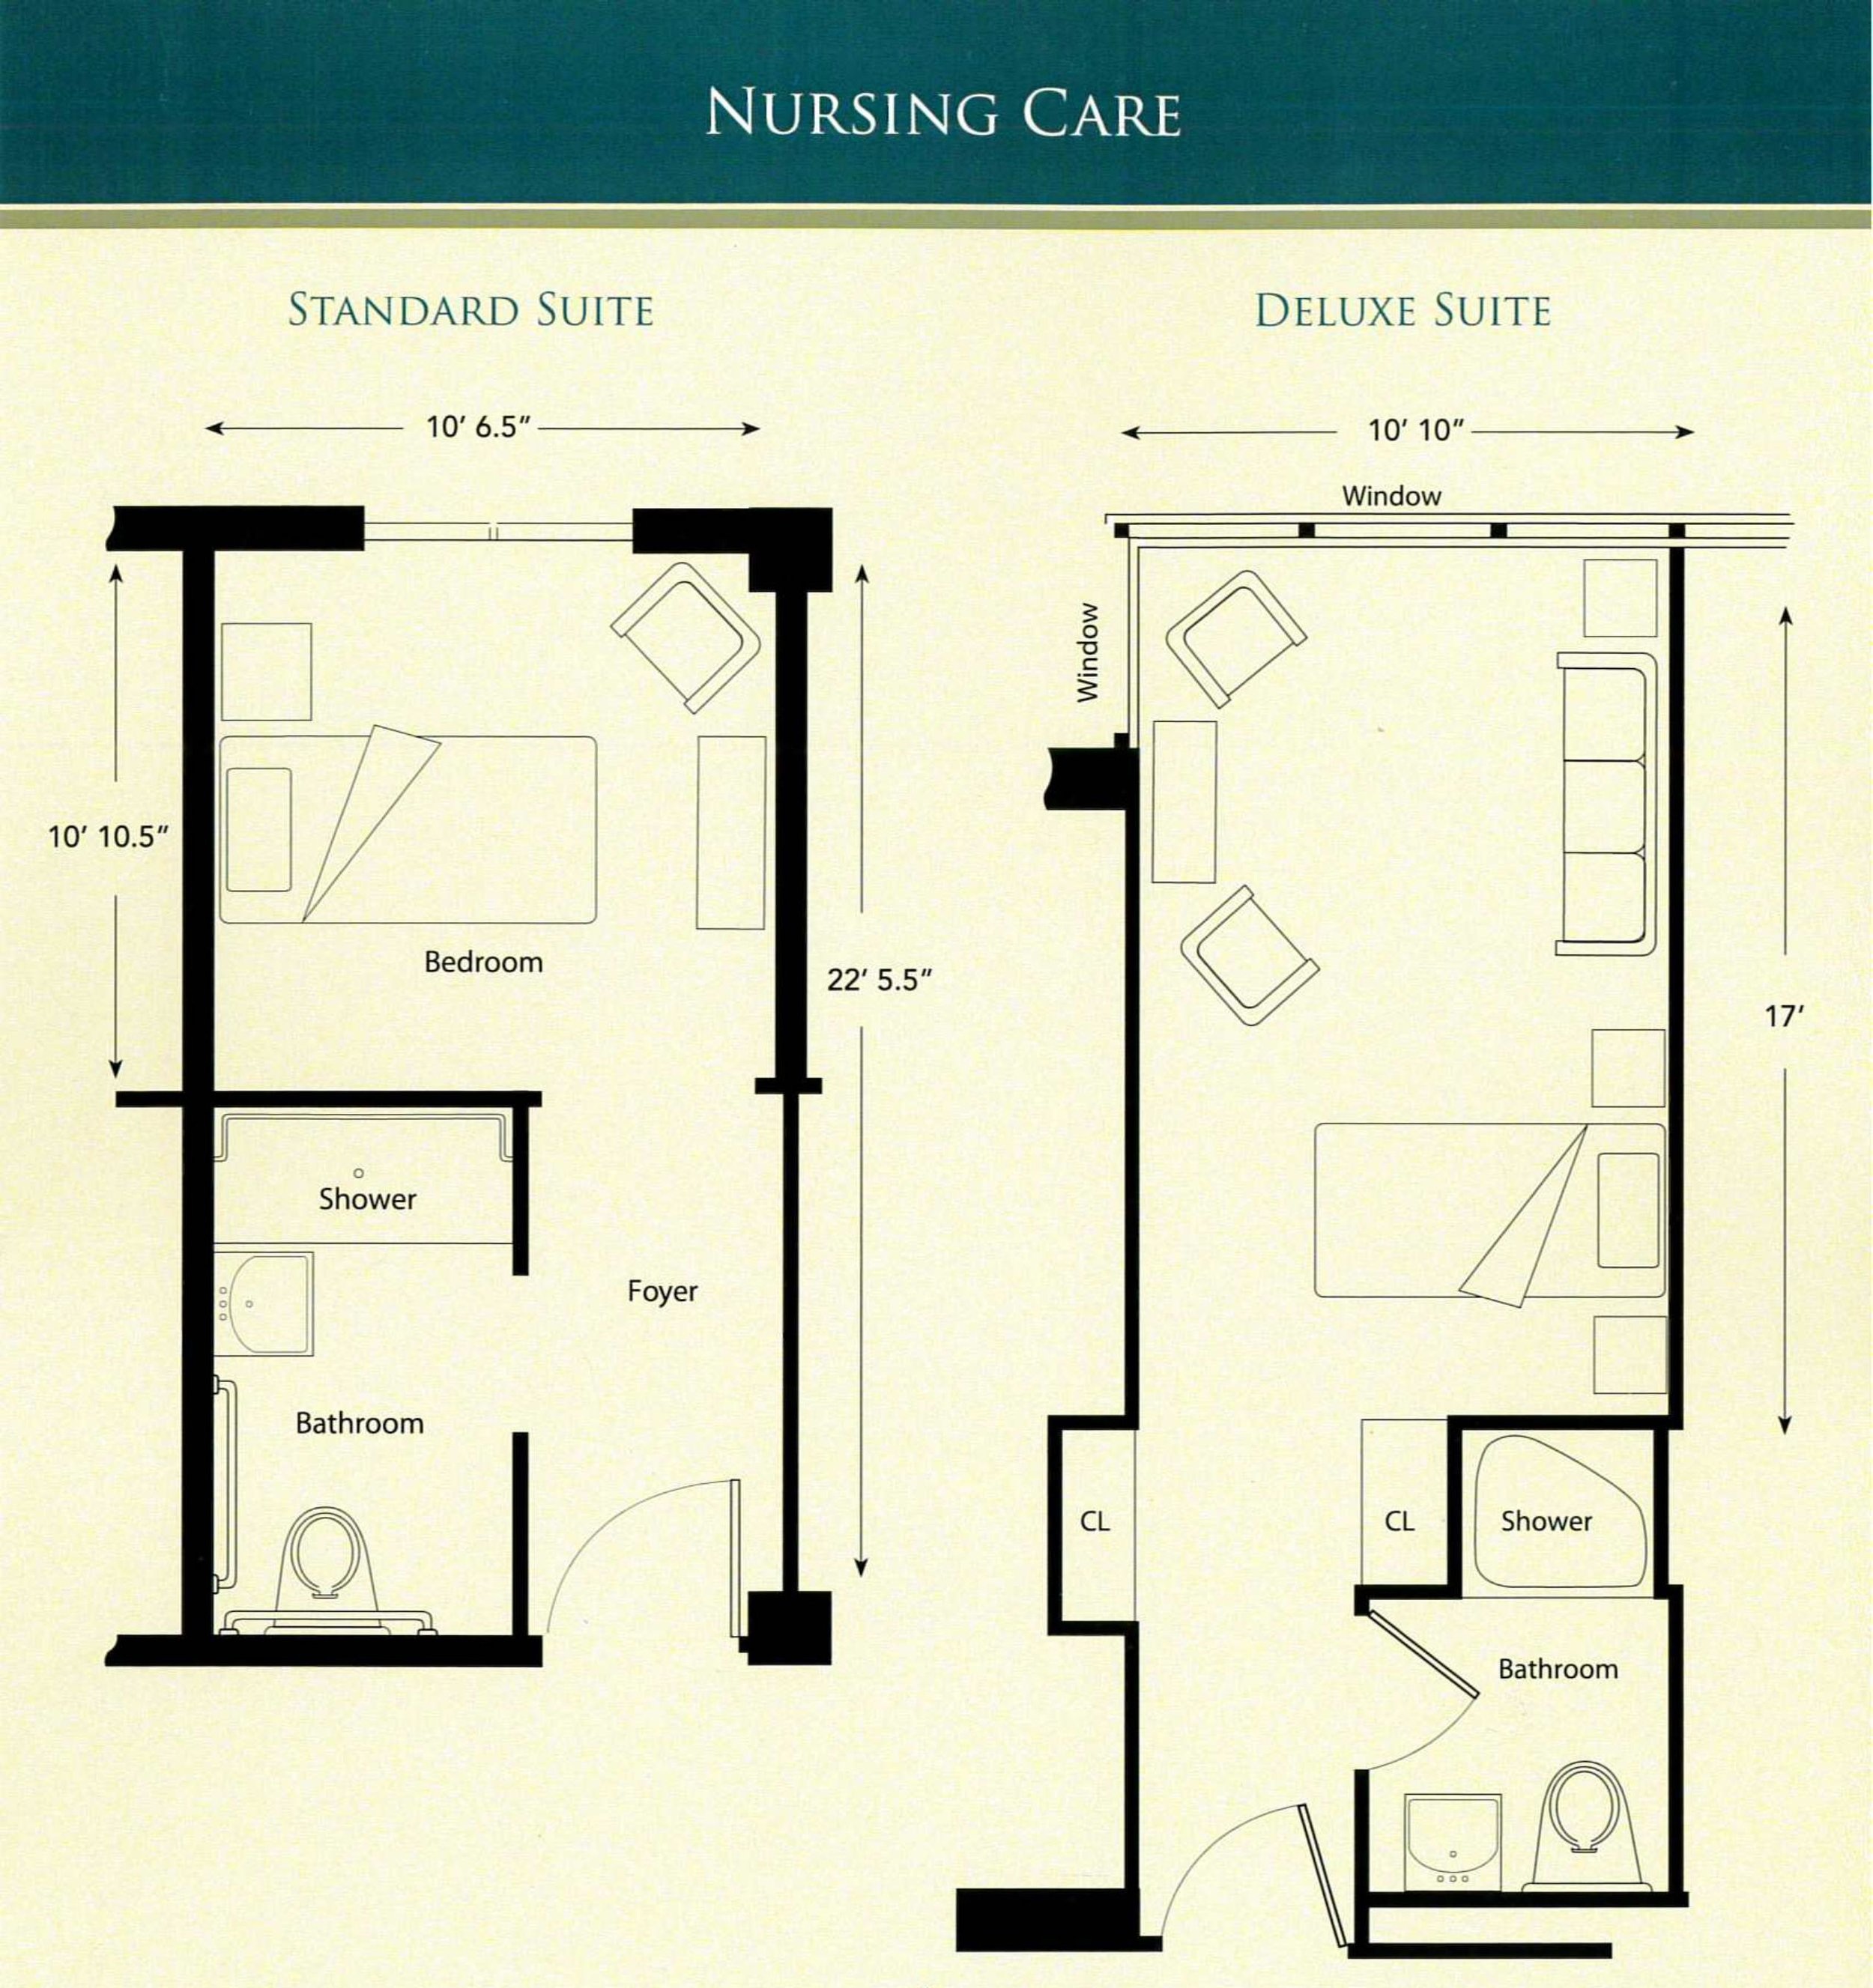 Nursing Care Standard and Deluxe Suites